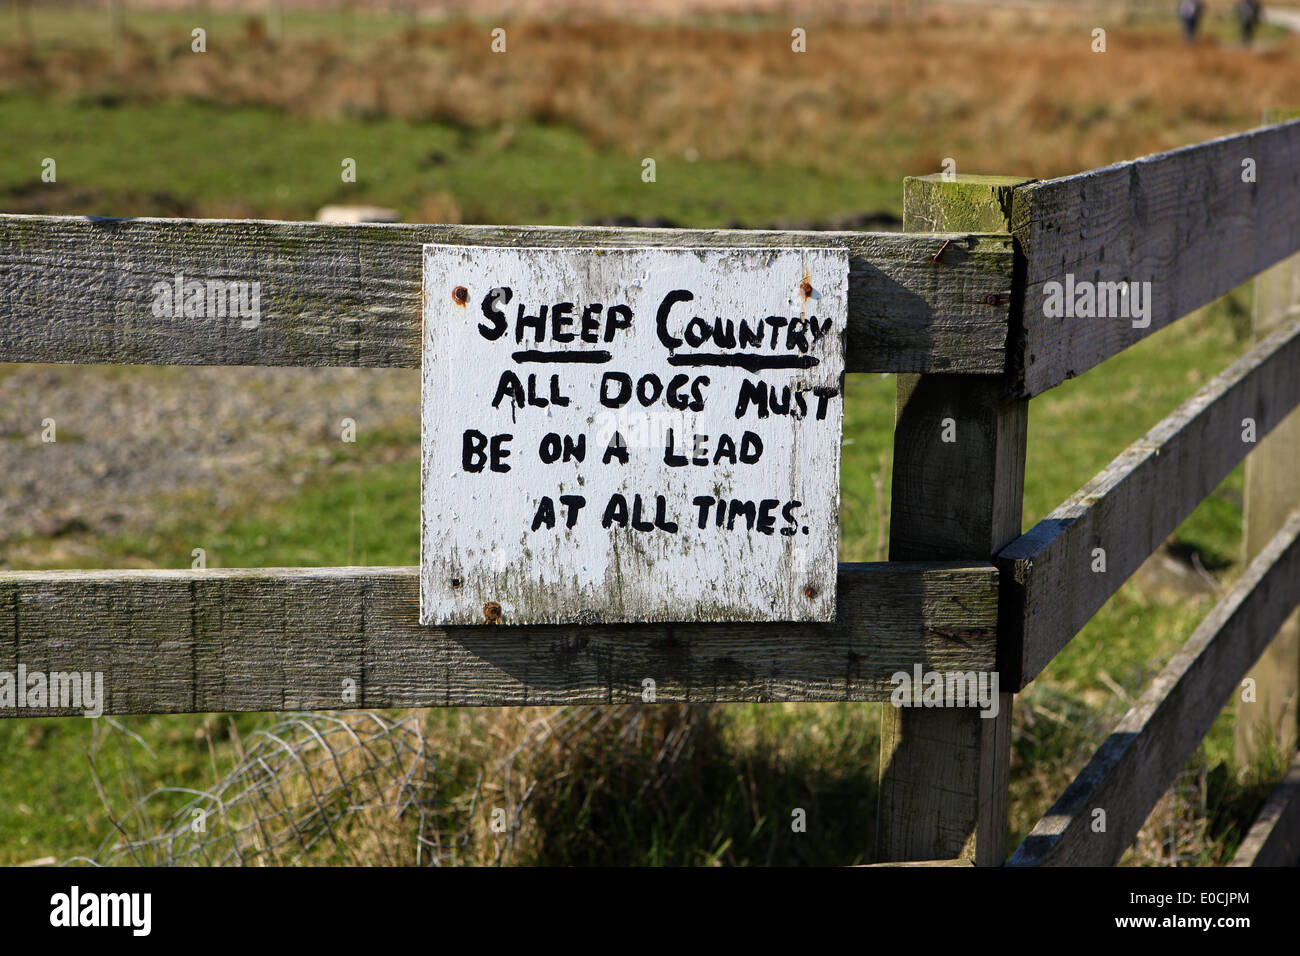 Dogs must be kept on a lead sign in the countryside Stock Photo